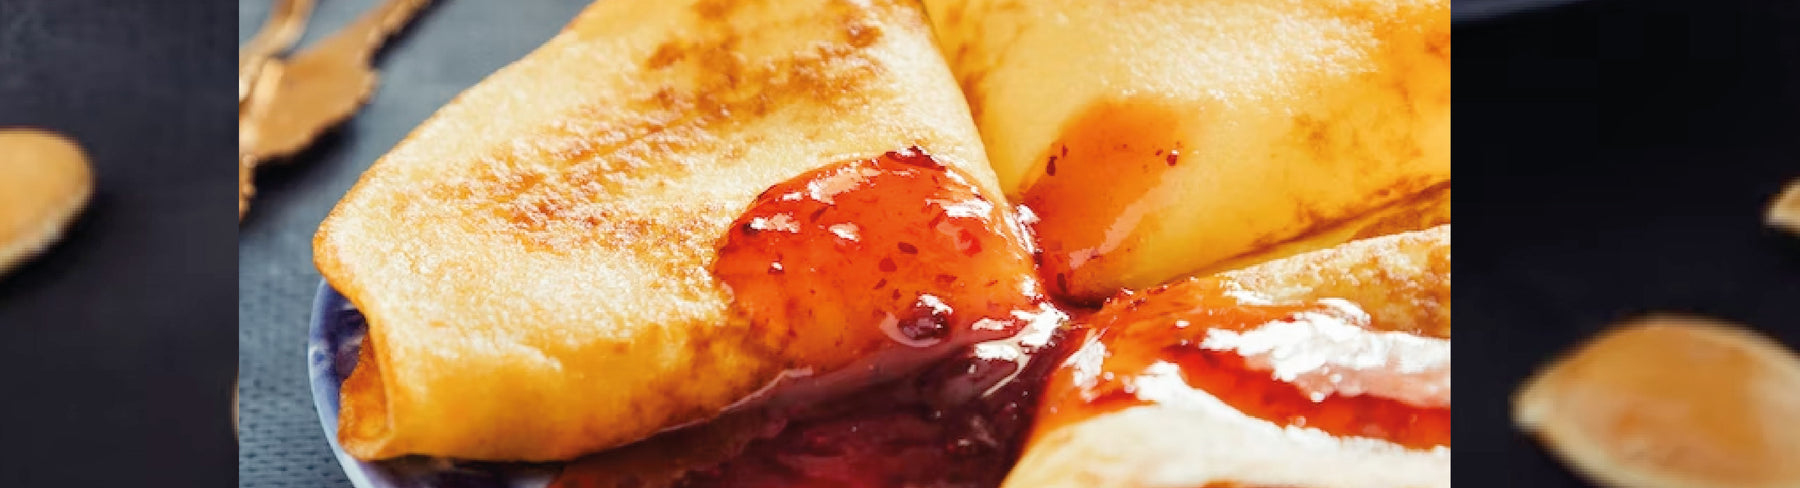 How to make vegan crepes with berry compote